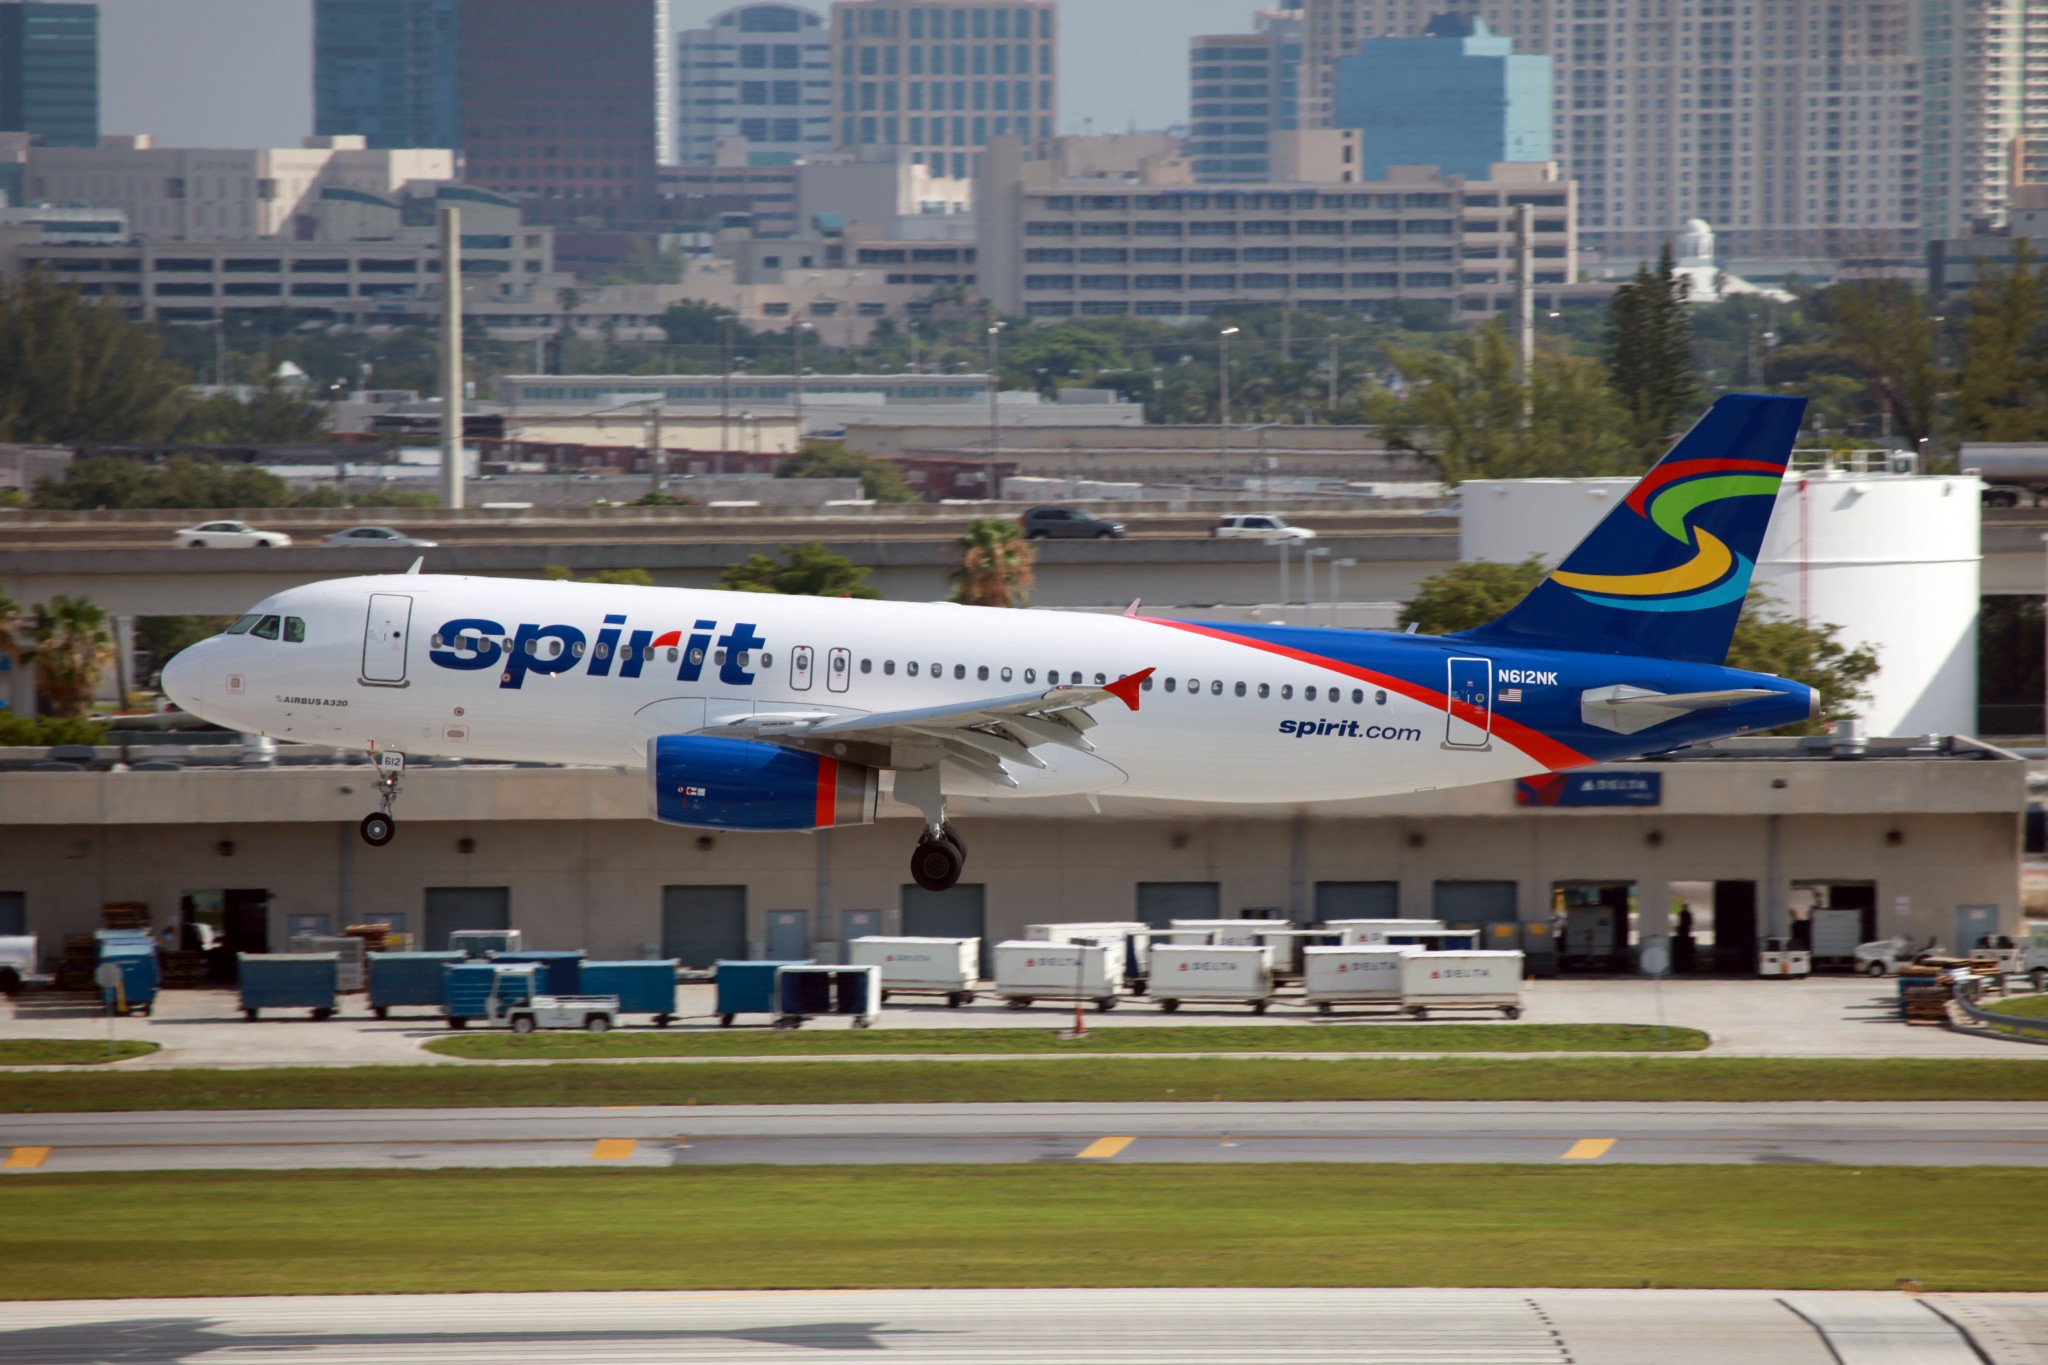 Spirit Airlines signs Kellstrom Aerospace and Vortex Aviation for MRO support services